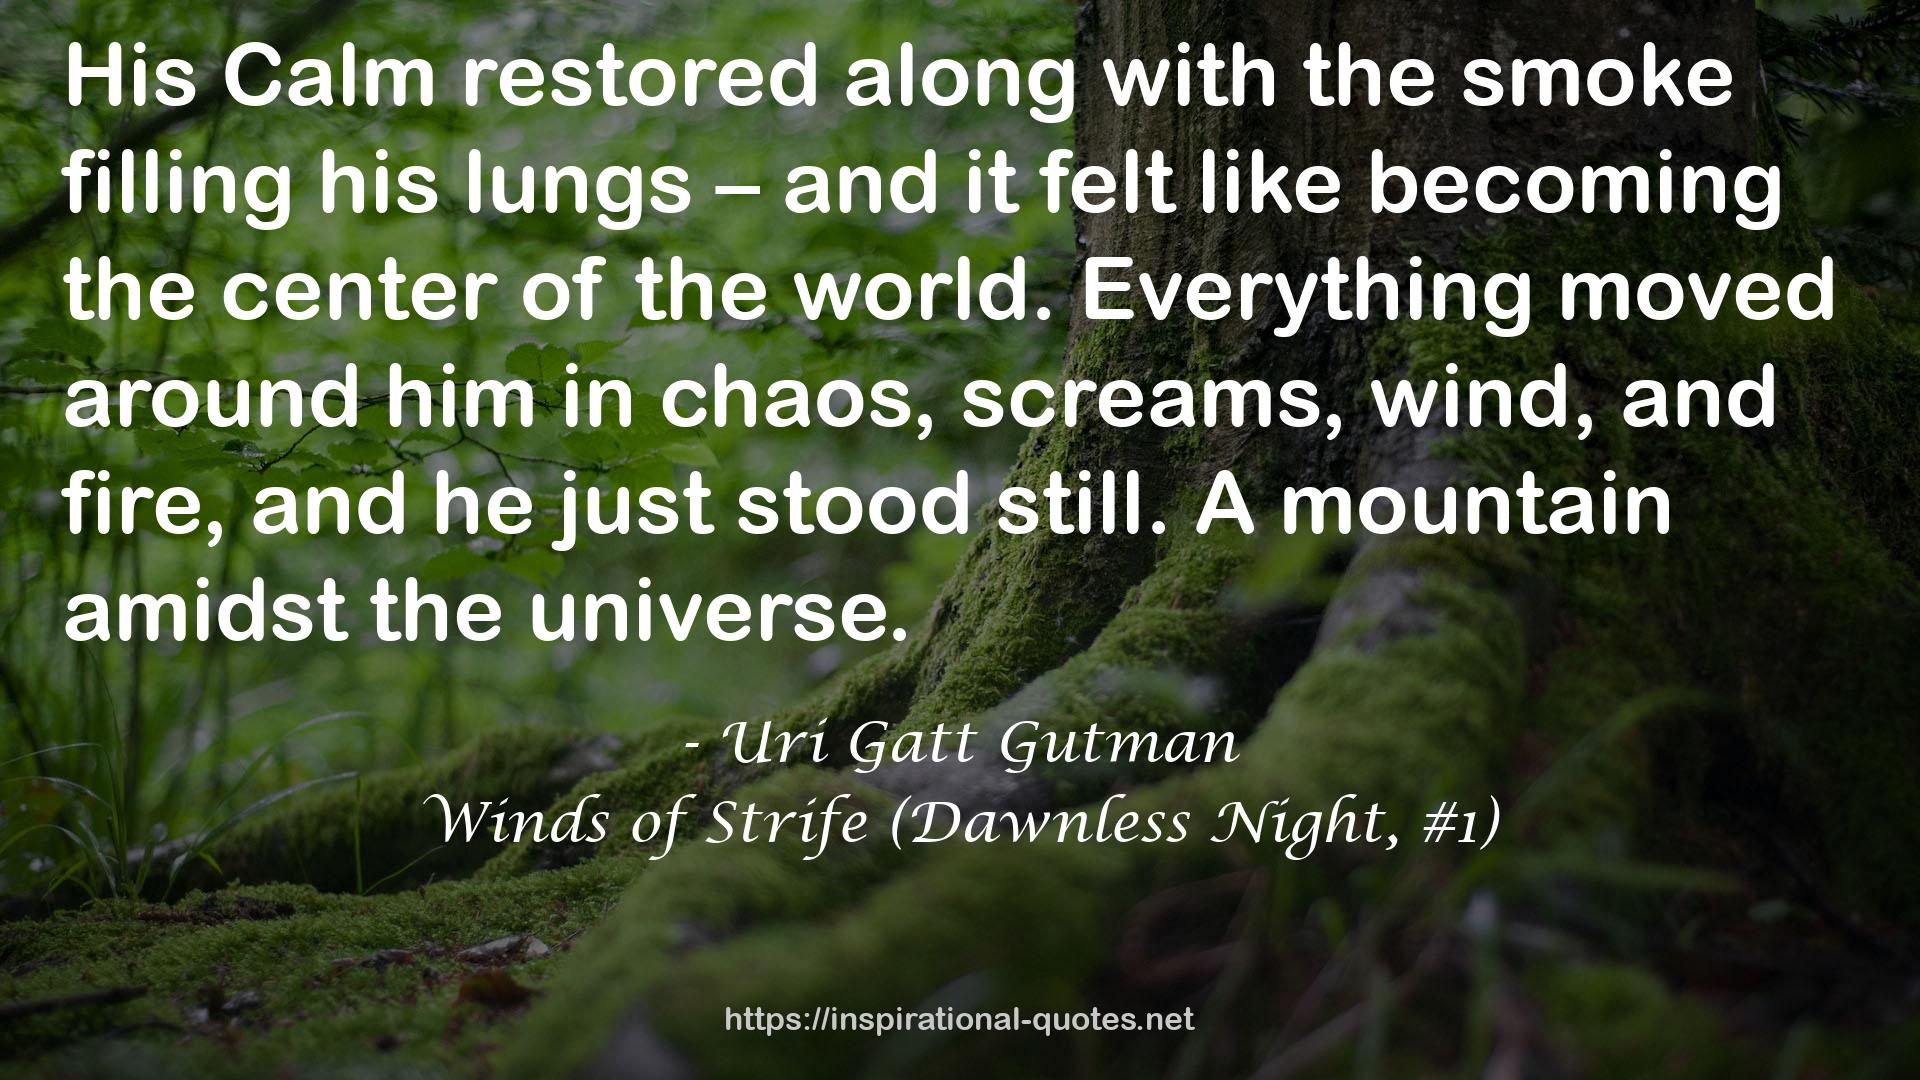 Winds of Strife (Dawnless Night, #1) QUOTES